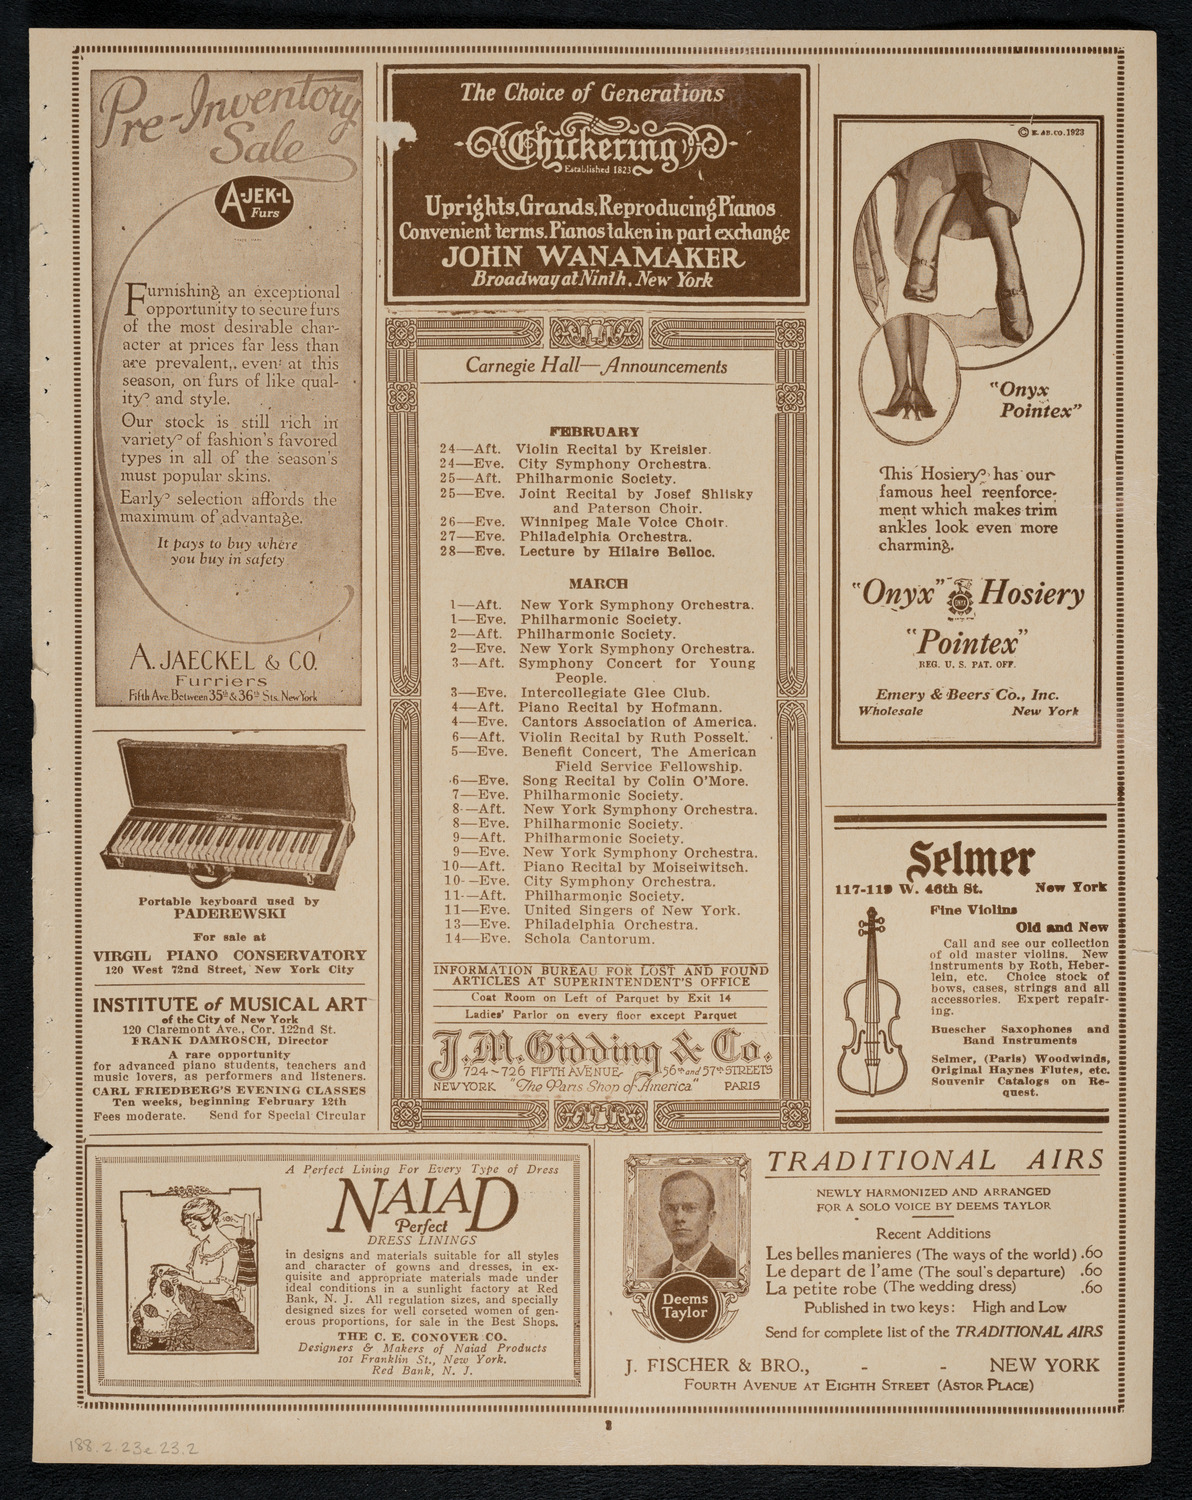 Universal Negro Improvement Association Meeting and Concert, February 23, 1923, program page 3